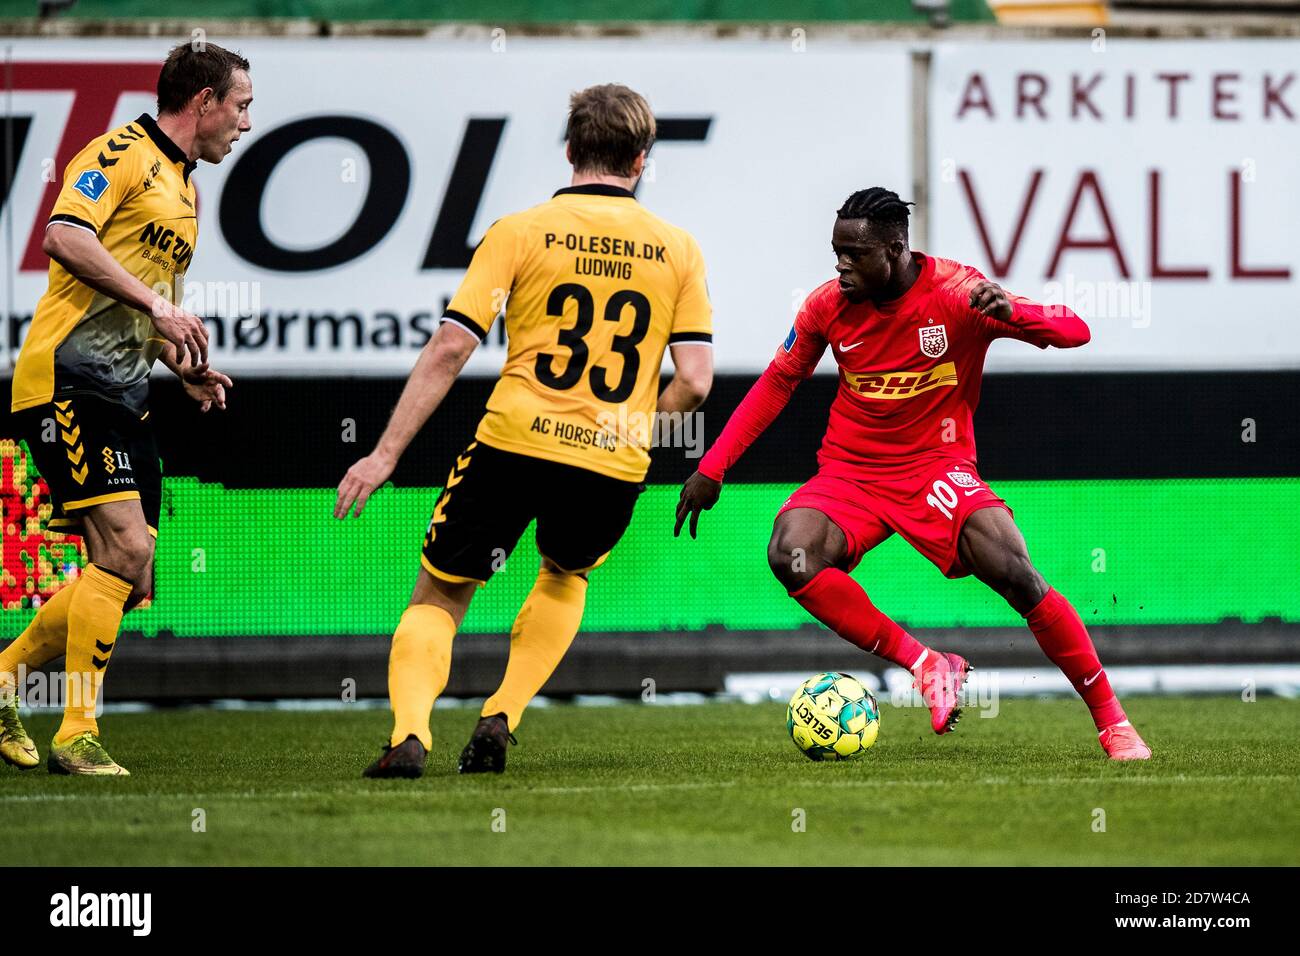 Horsens, Denmark. 25th Oct, 2020. Kamal-Deen Sulemana (10) of FC Nordsjaelland seen during the 3F Superliga match between AC Horsens and FC Nordsjaelland at Casa Arena in (Photo Credit: Gonzales Photo/Alamy